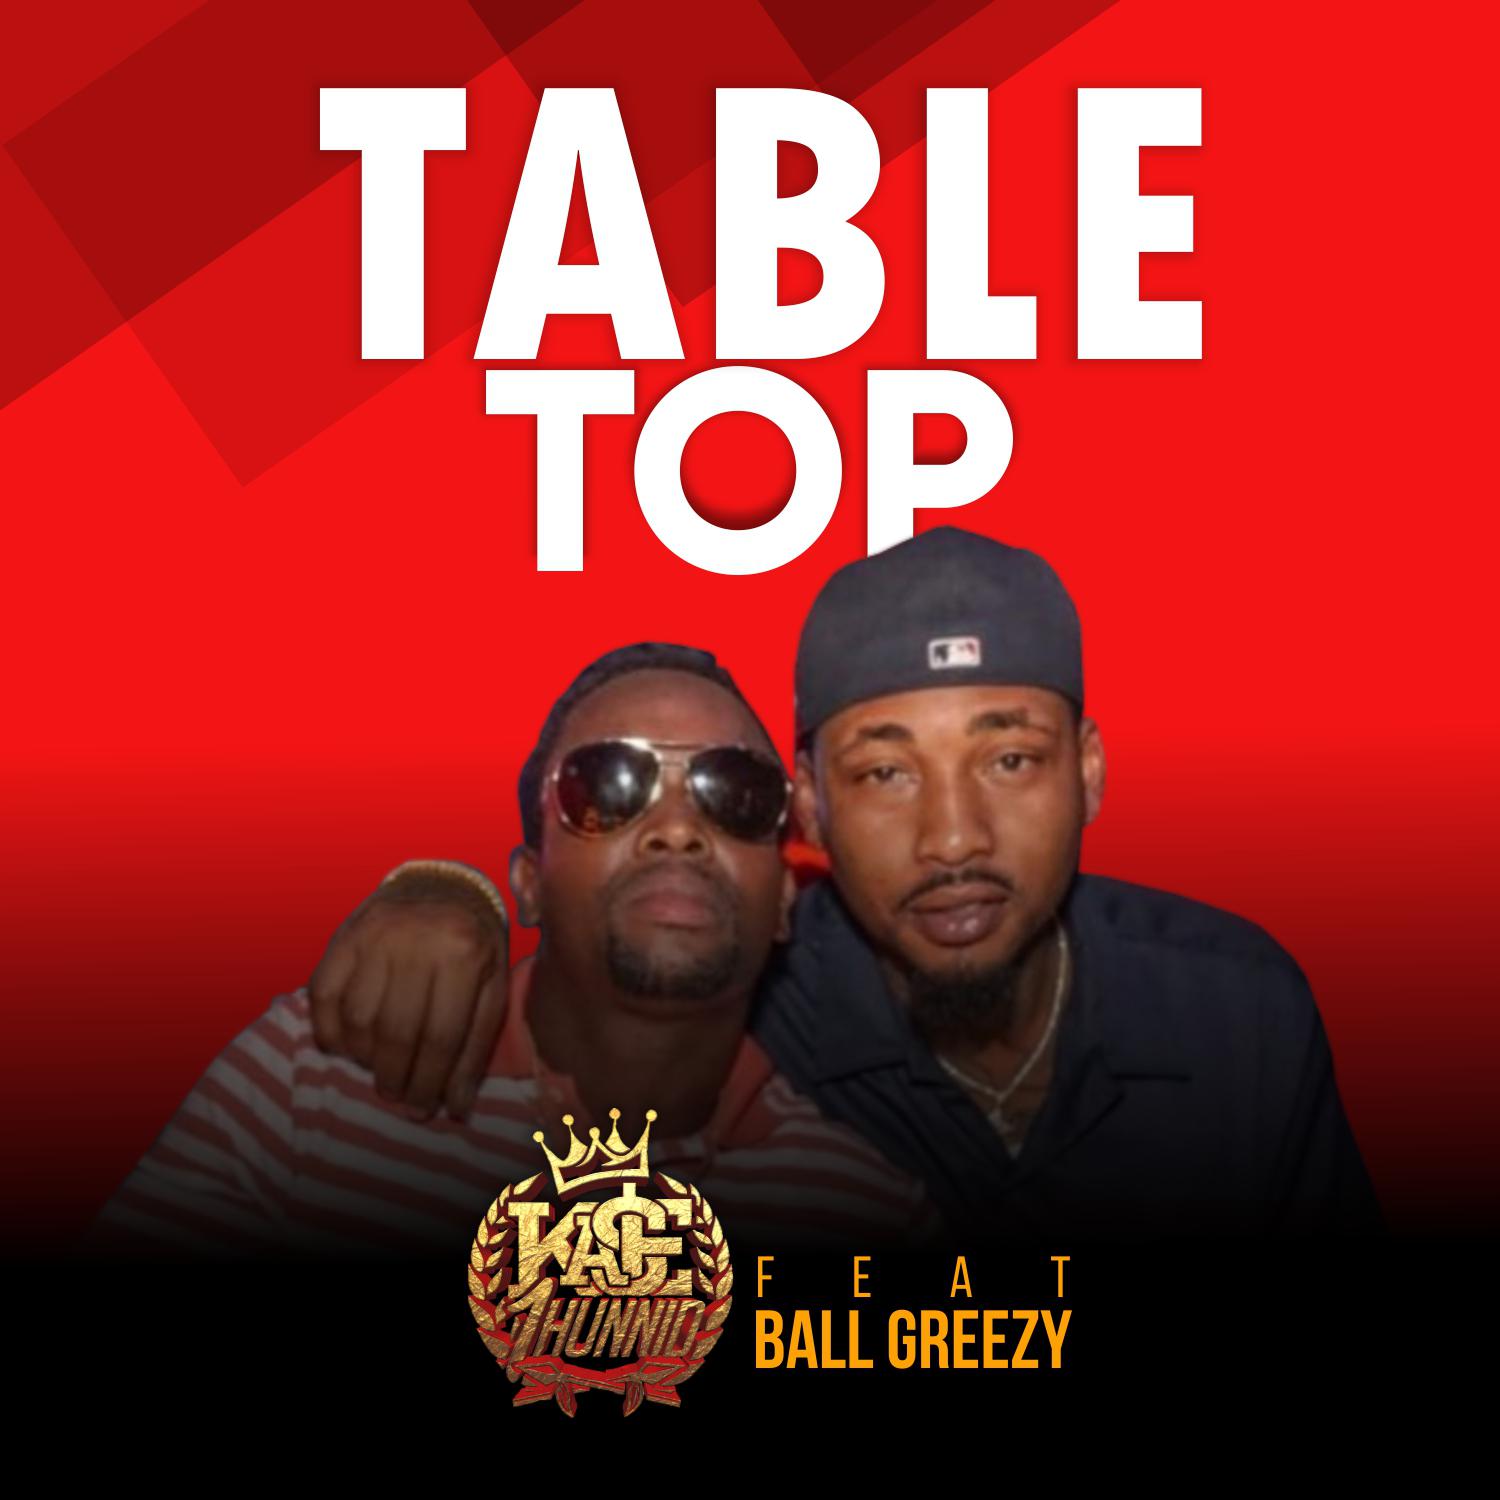 Table Top